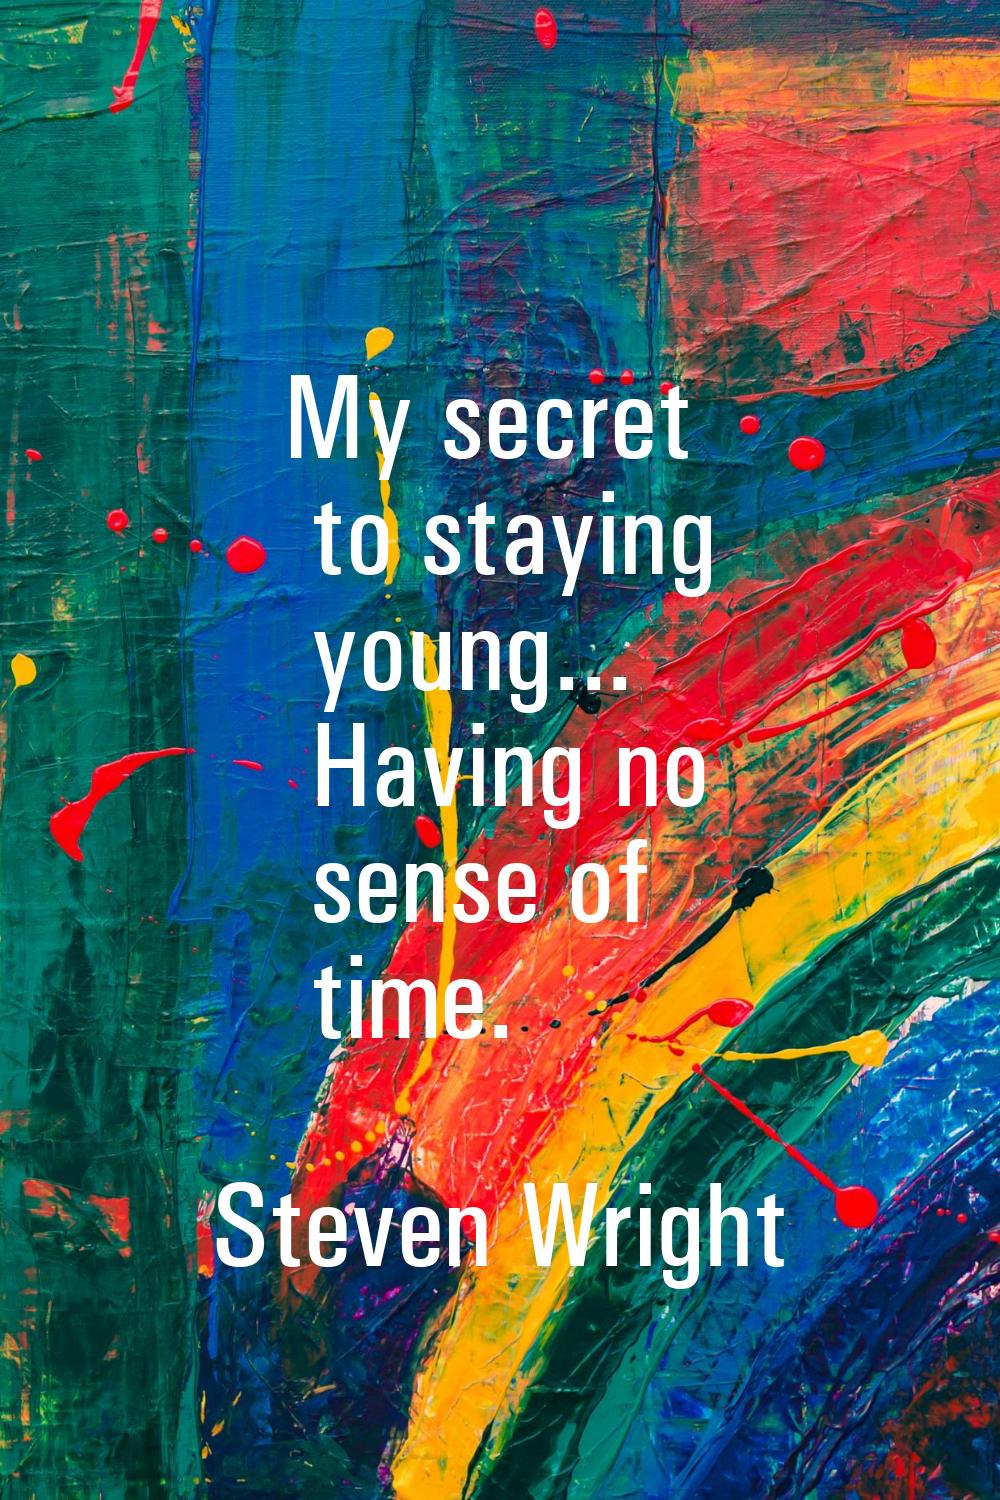 My secret to staying young... Having no sense of time.